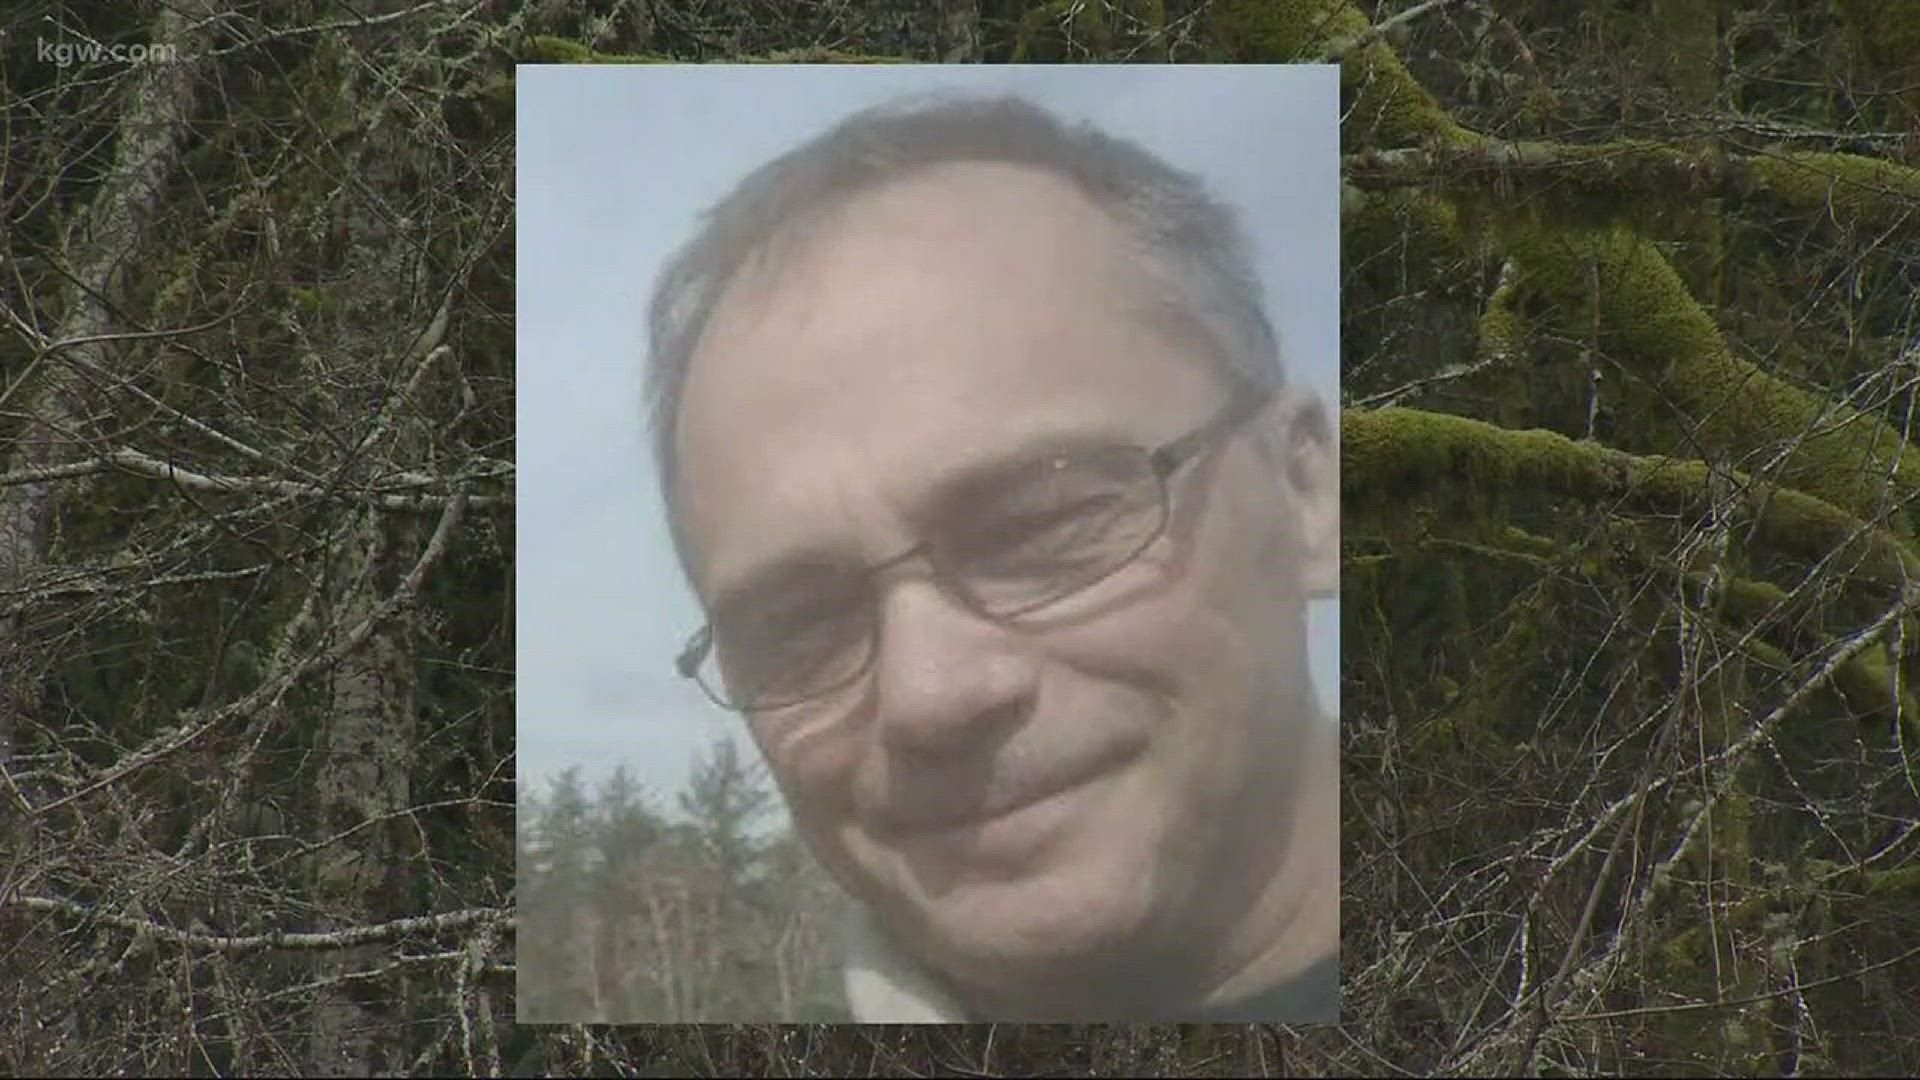 Search intensifies for missing St. Helens man